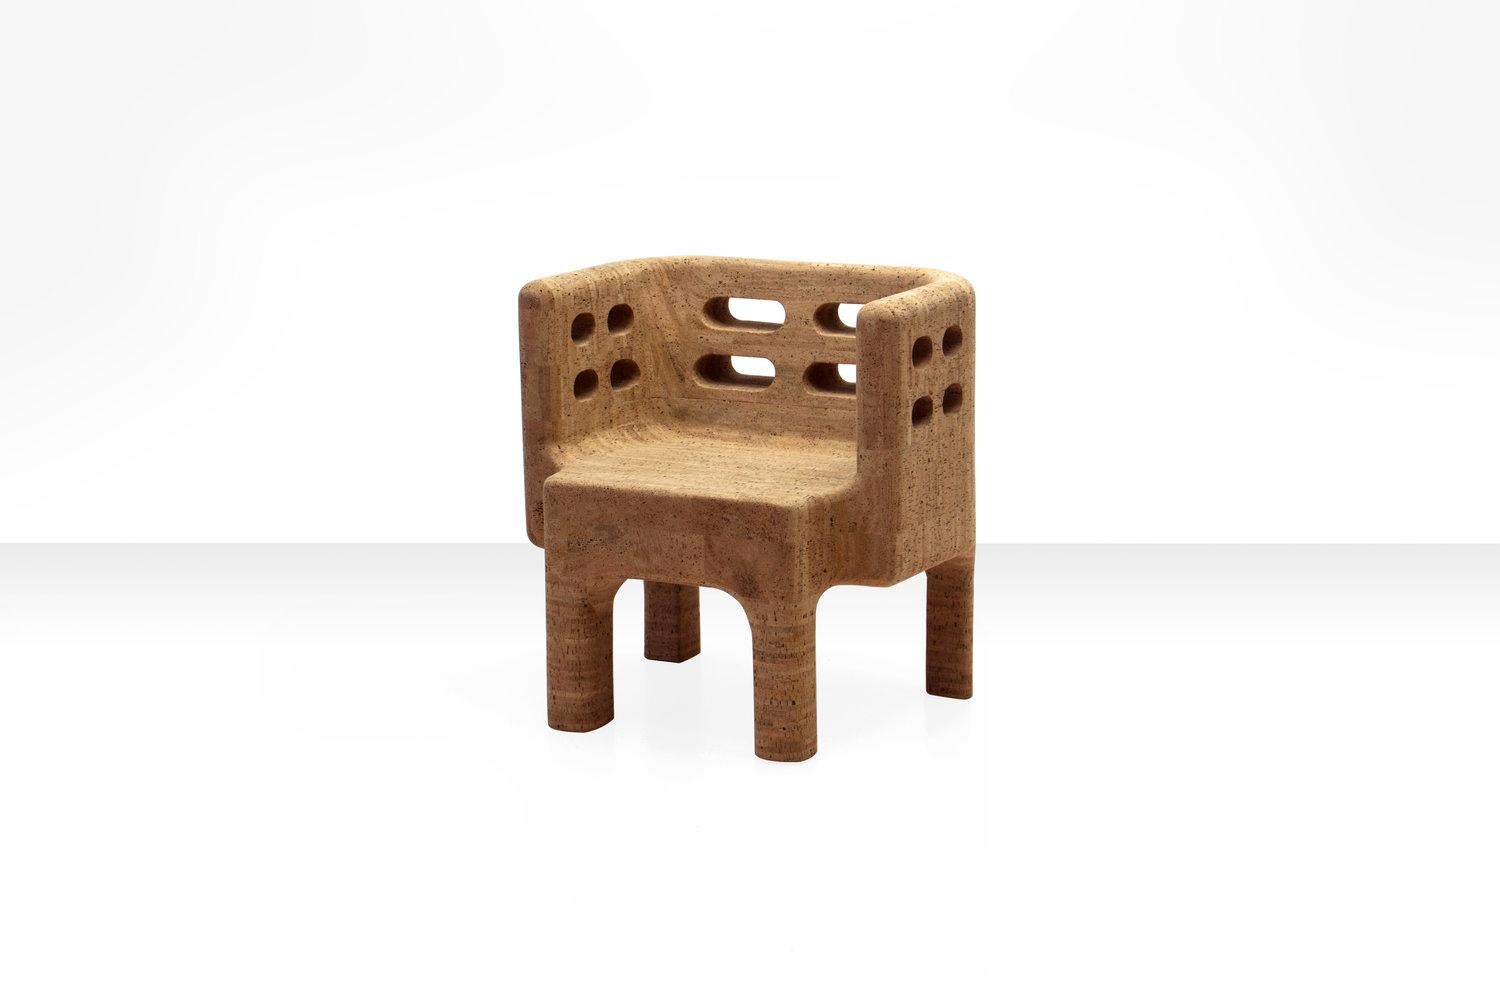 Made in limited edition of only 150, the “Sobreiro” (Portuguese for cork oak tree) armchair is part of the small exclusive Sobreiro Collection of cork furniture designed by the Campana Brothers. 

This armchair – the only chair in the collection –